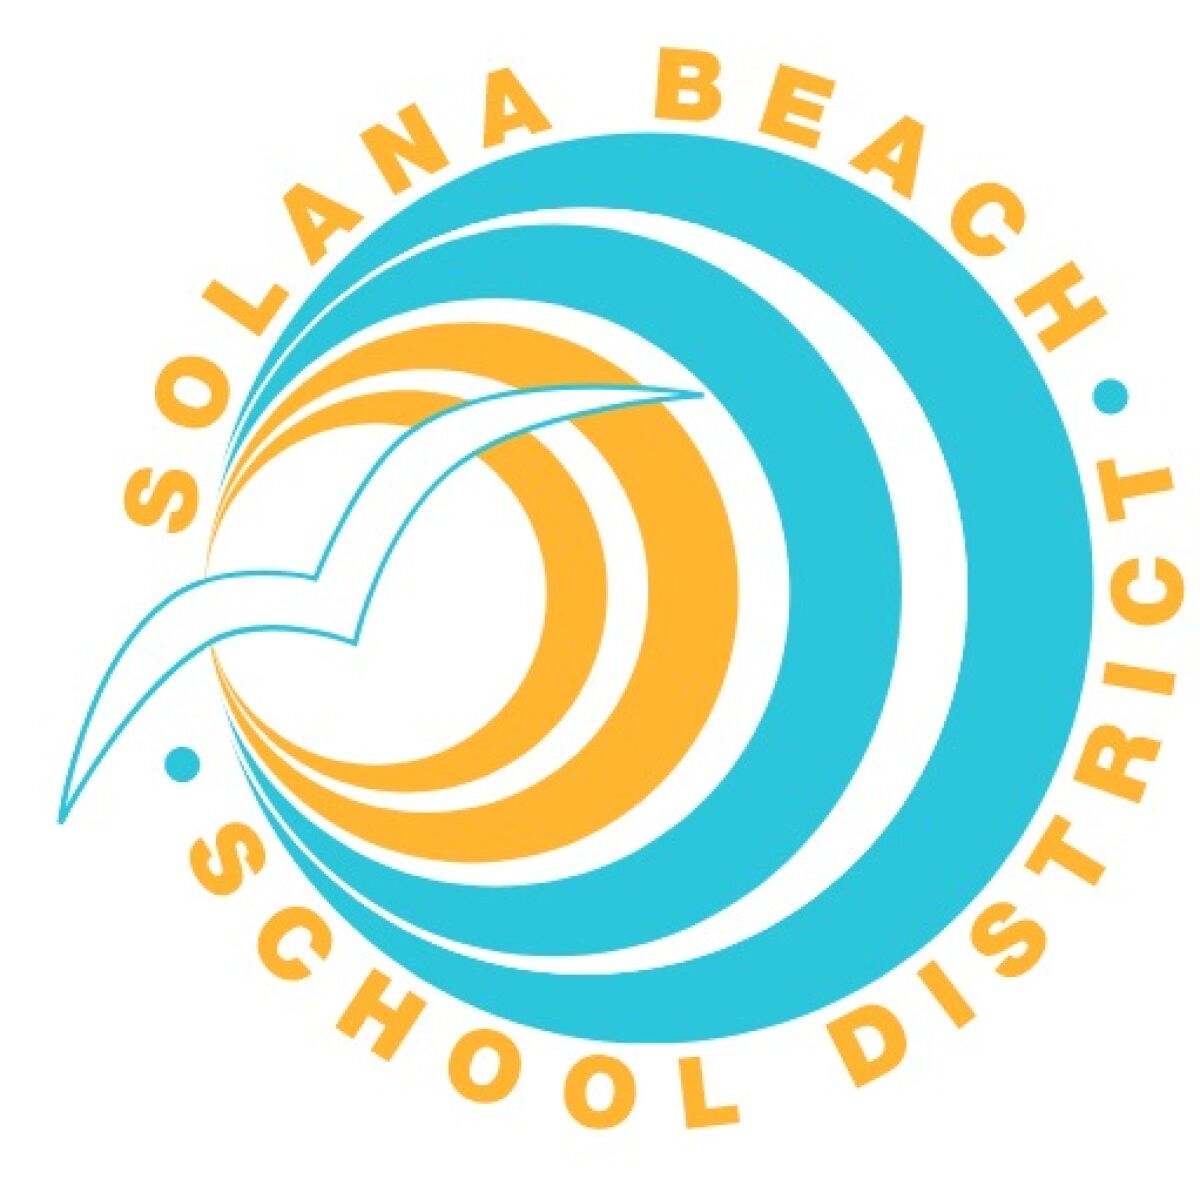 The new Solana Beach School District logo, created by former district parent Mary Tomlinson.